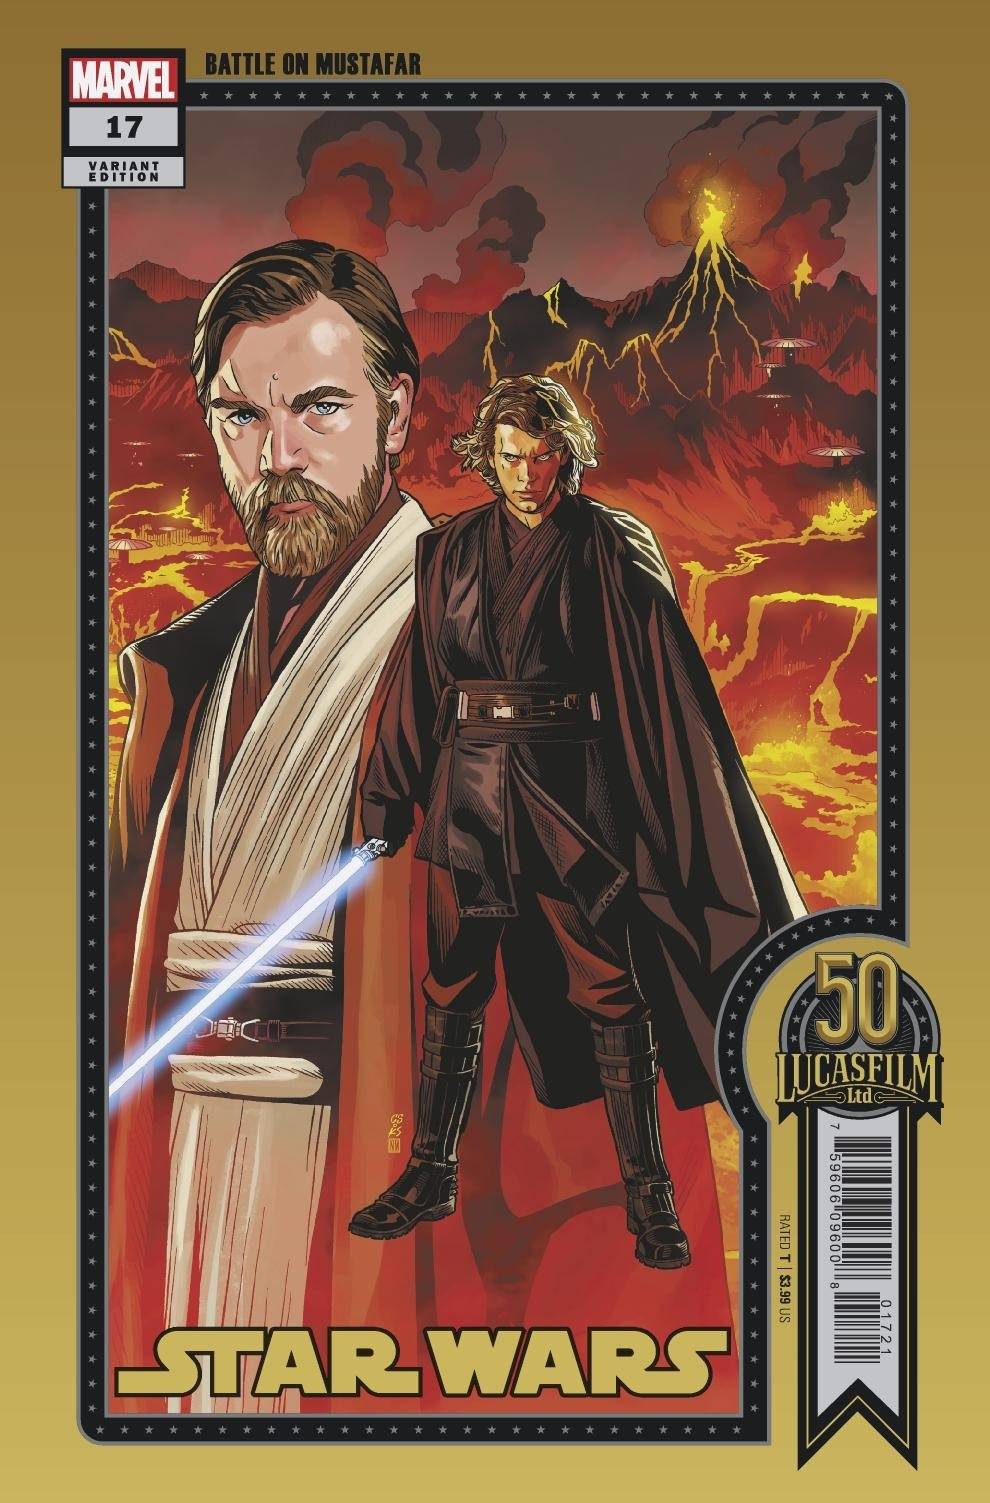 Star Wars #17 (Chris Sprouse "Battle on Mustafar" Lucasfilm 50th Anniversary Variant Cover) (29.09.2021)